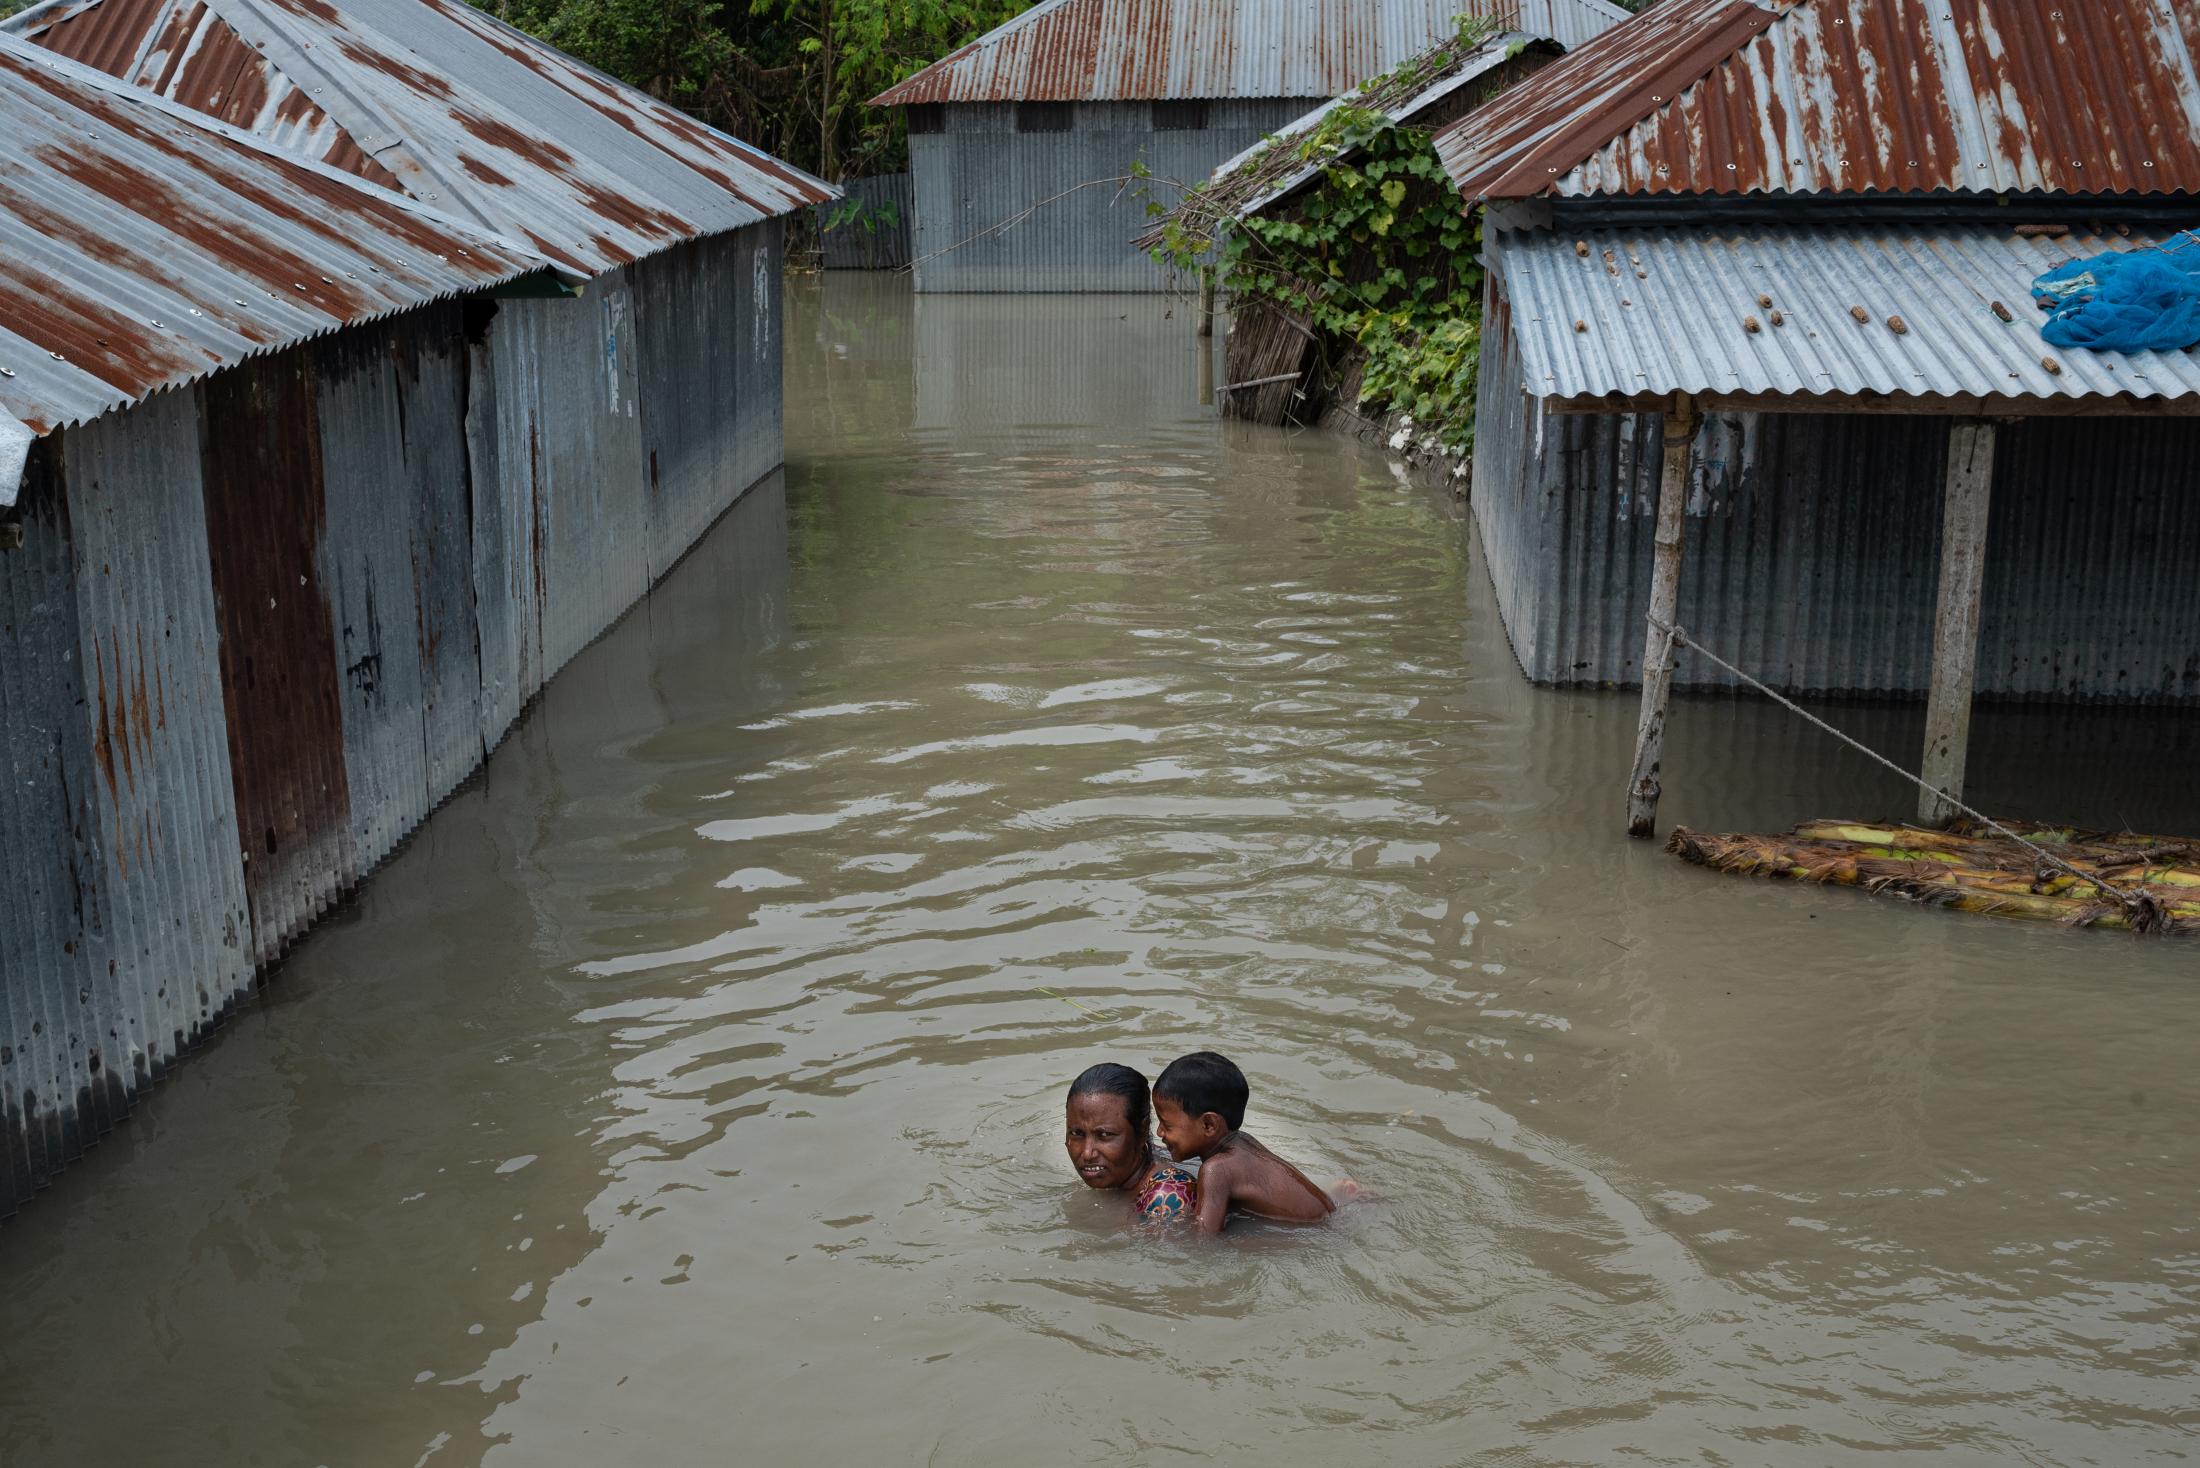 The Depth of Flood - A woman with her baby girl on her back swims through...